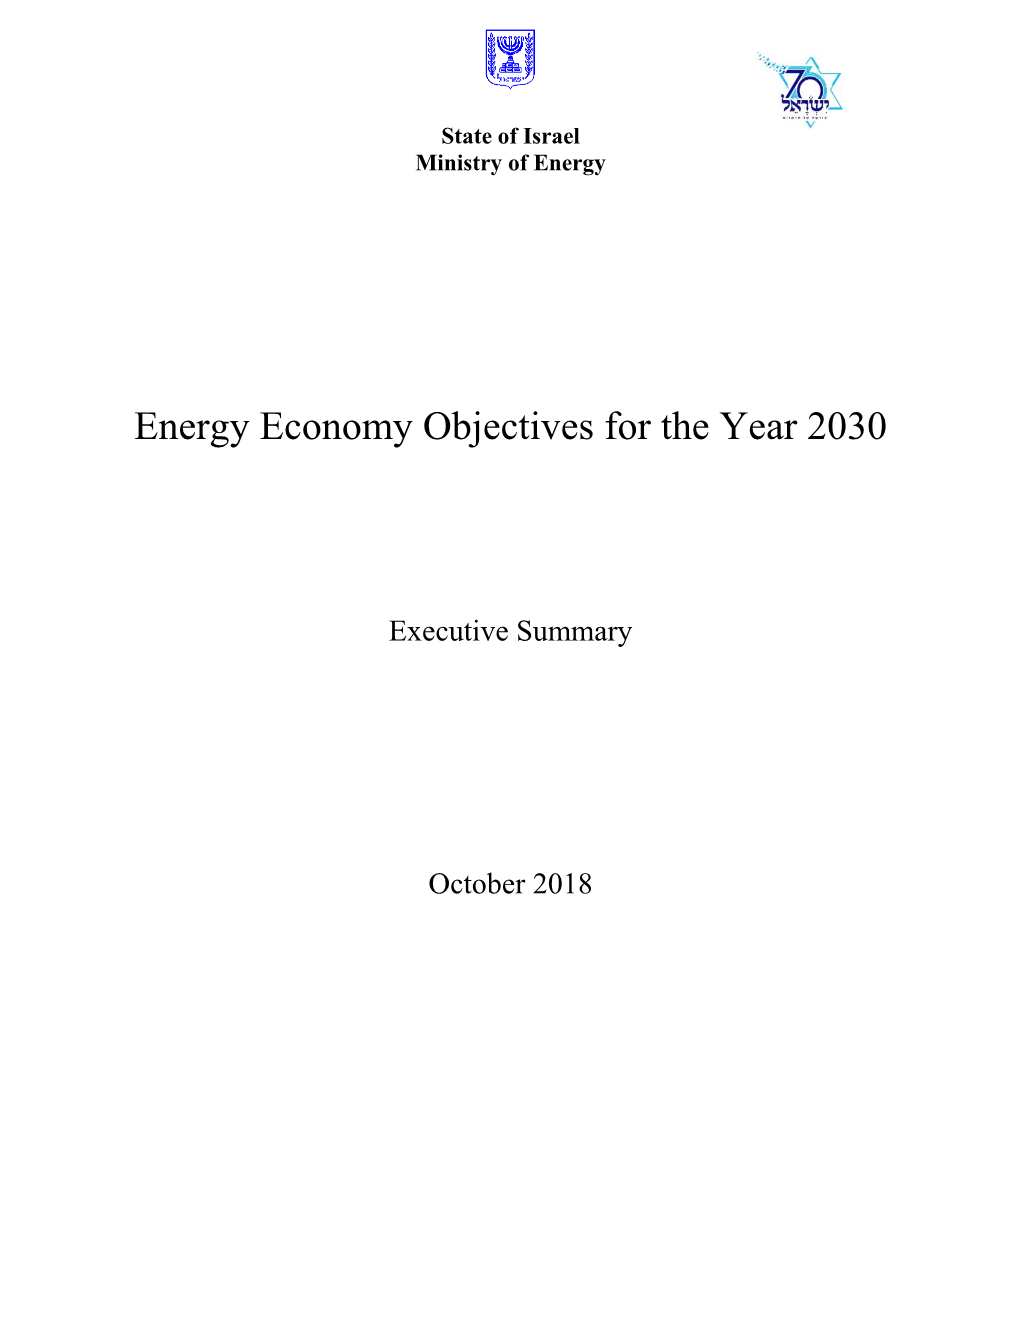 Energy Economy Objectives for the Year 2030